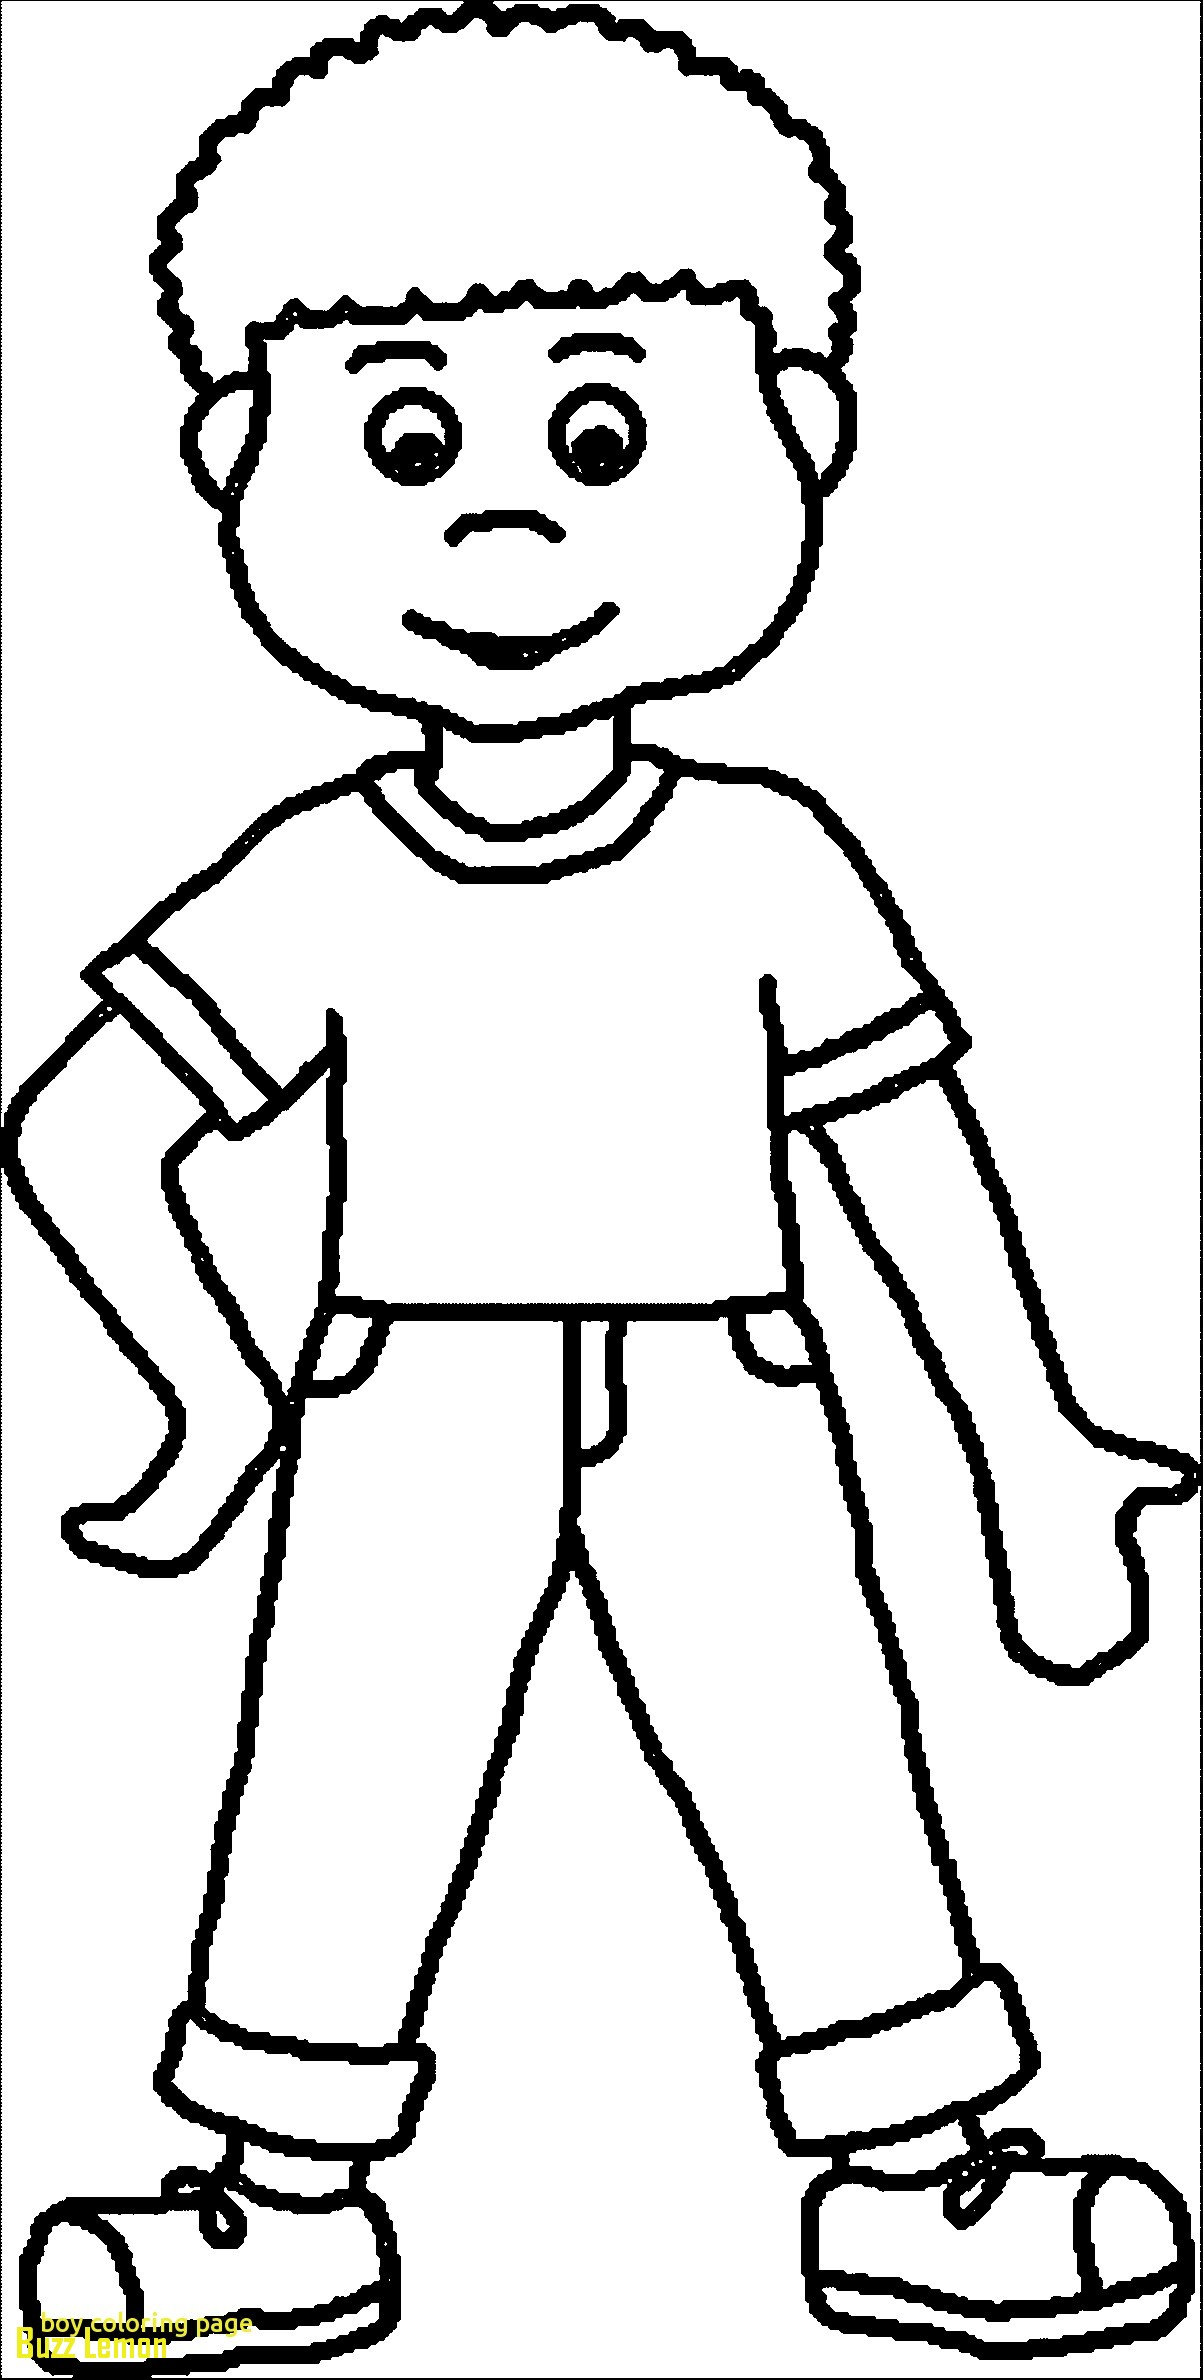 coloring page boy awesome boy coloring page with image printable coloring pages for boys 54